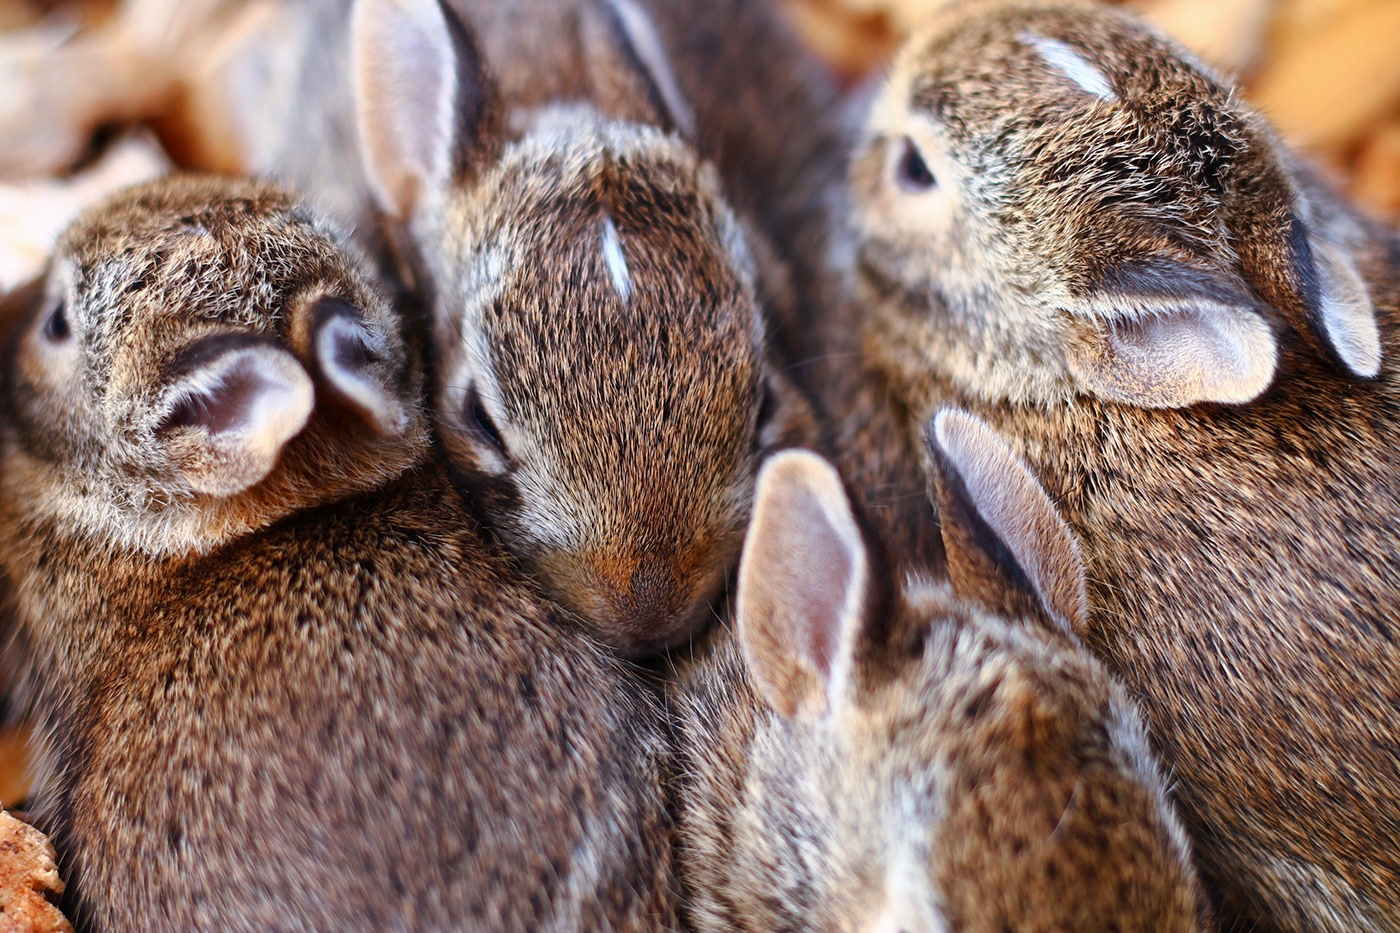 Ontario Canada ontario canada bunnies cottontail Cottontails baby bunnies nature photography Nature fall weather